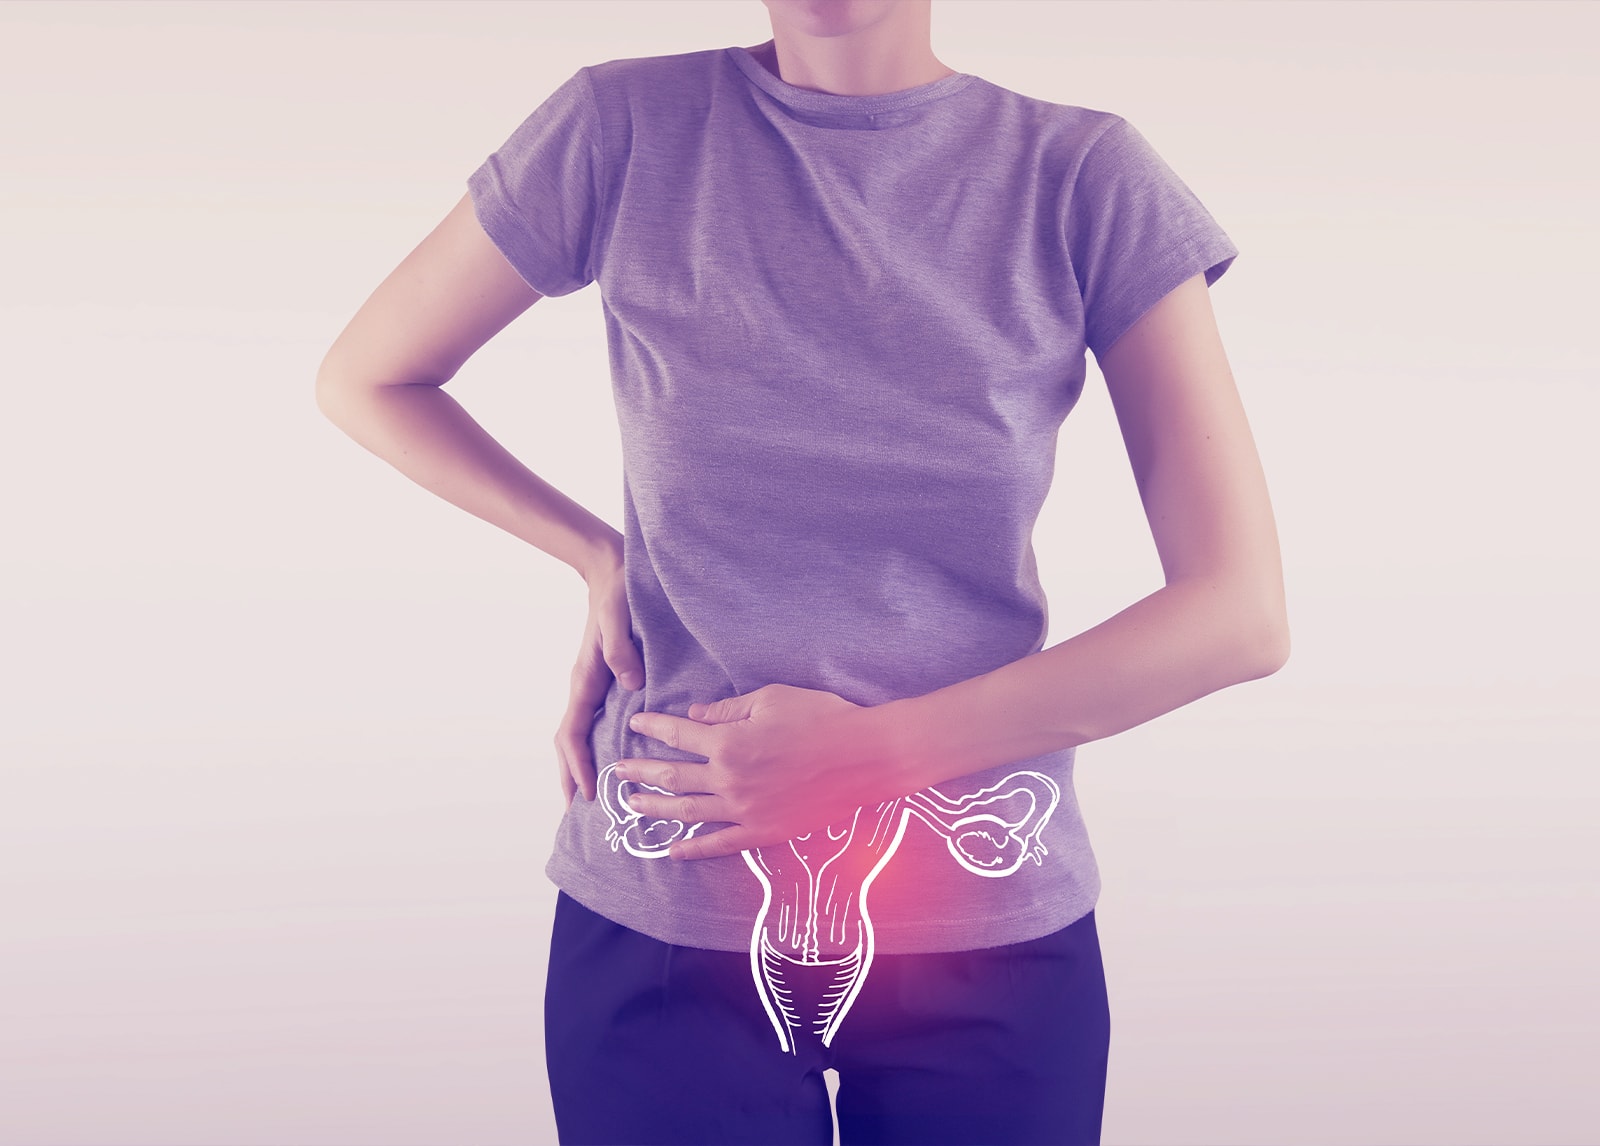 Women with undiagnosed endometriosis worse off when undergoing fertility treatment, study finds